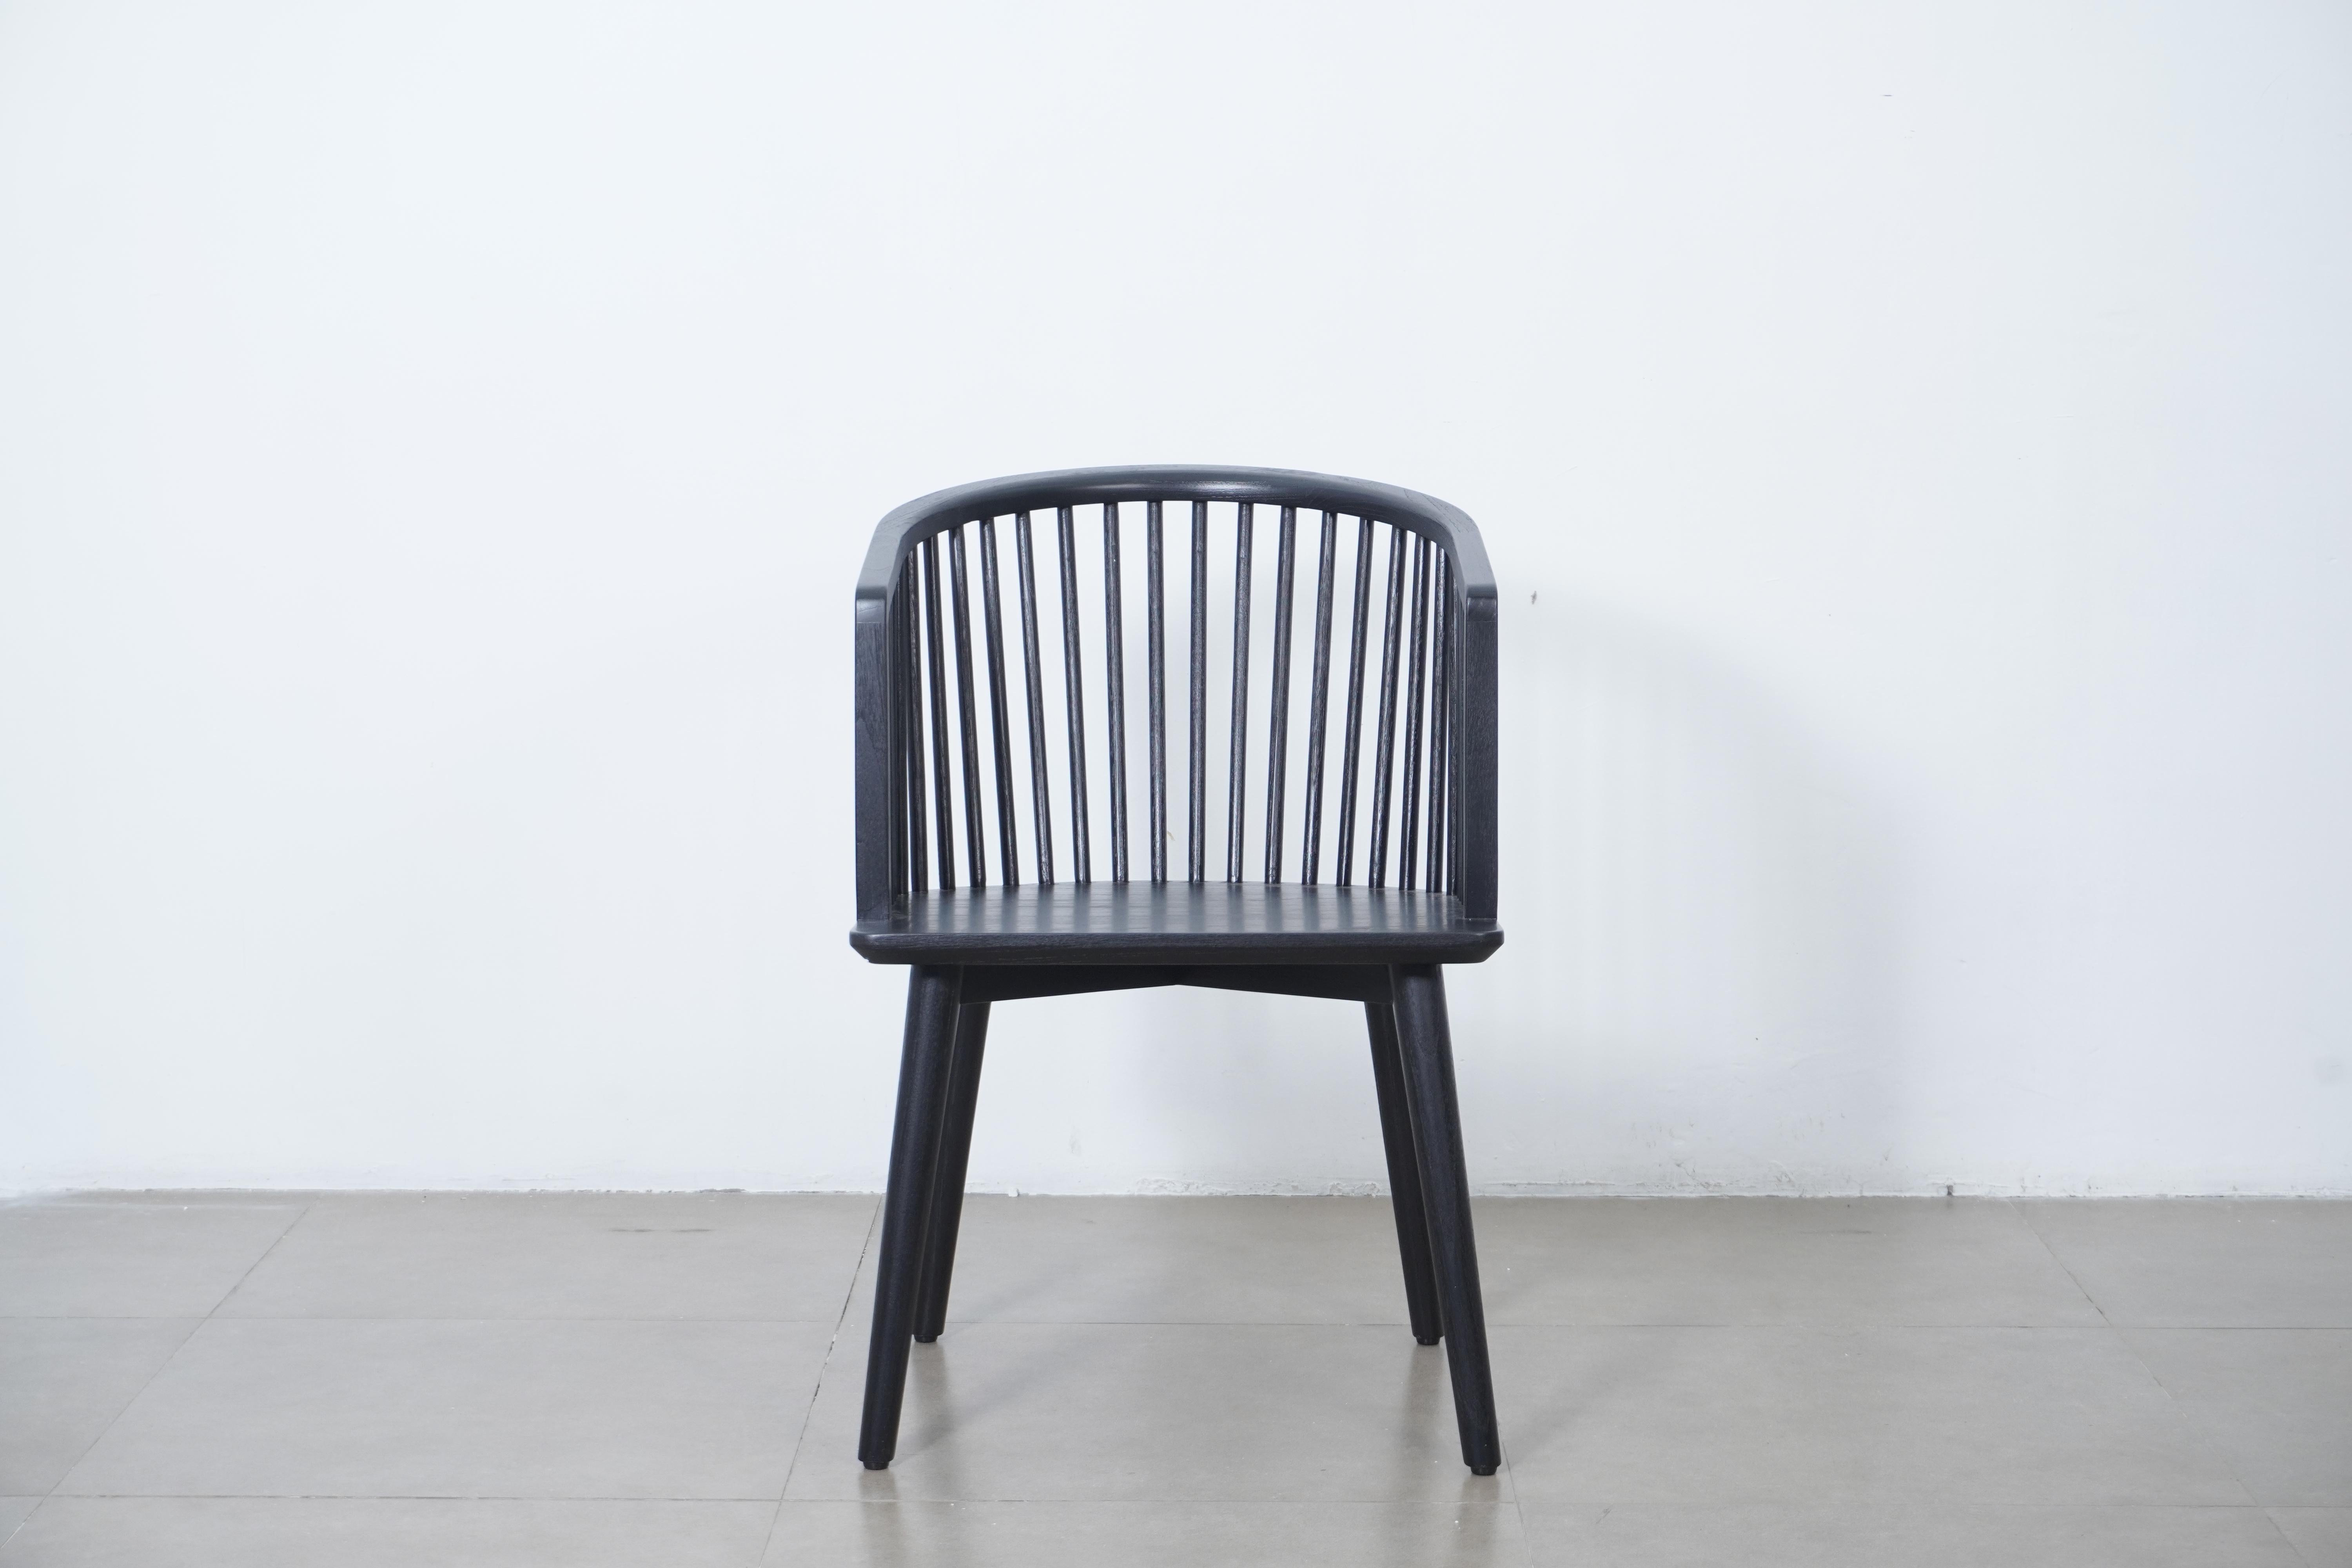 Modern Danish Peasant Dining Chair, Teak in Black Finish. Set of 6 chairs For Sale 10